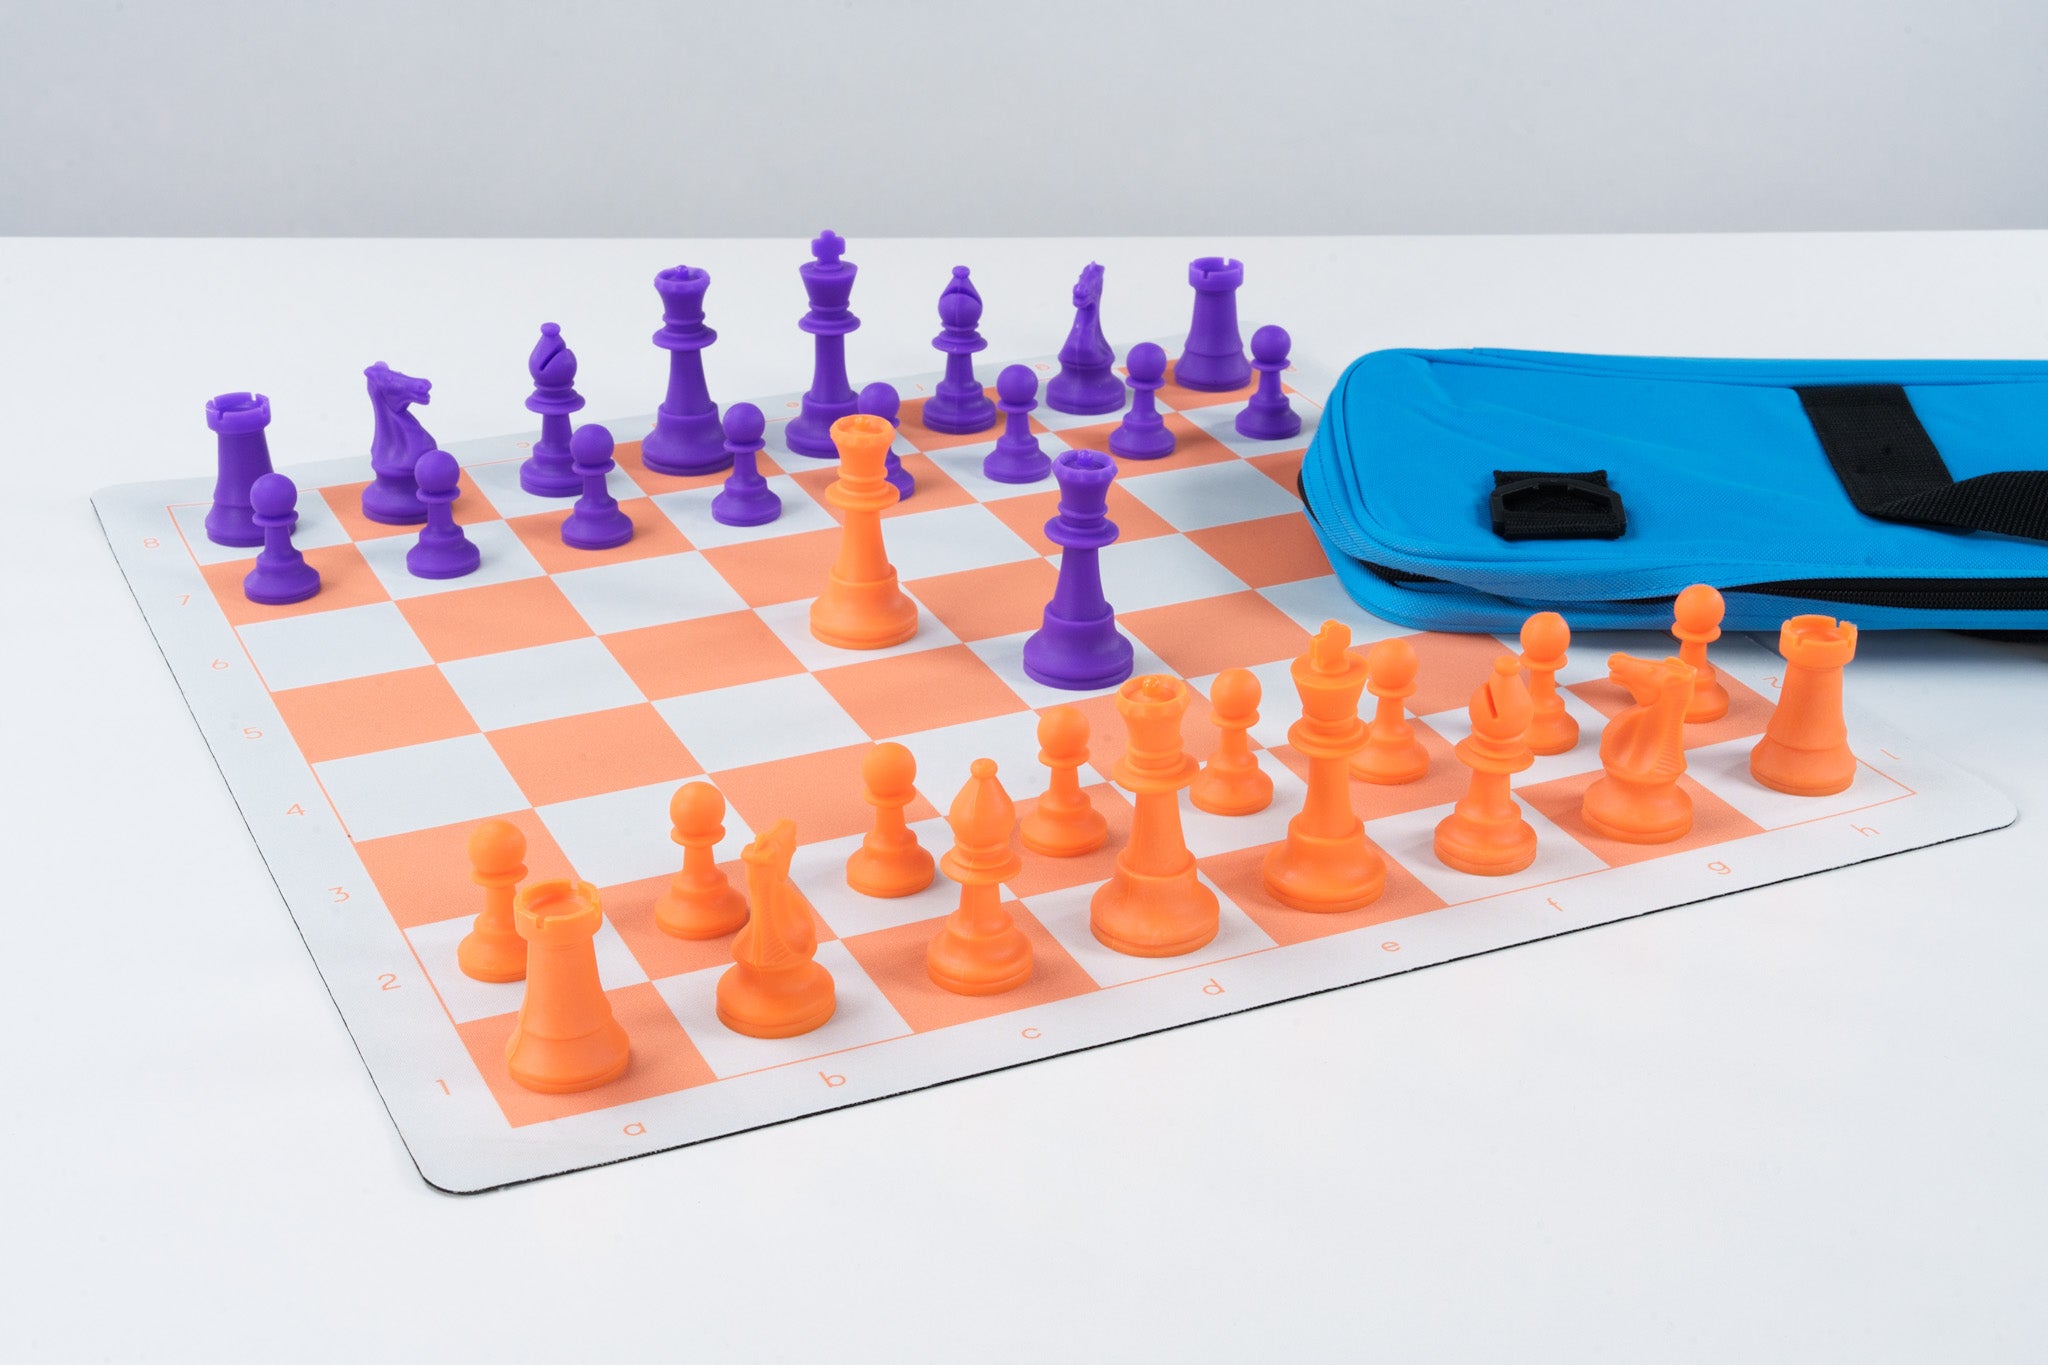 Stealth Combo - Flex Pad Silicone Chess Set with Deluxe Bag - Chess Set - Chess-House